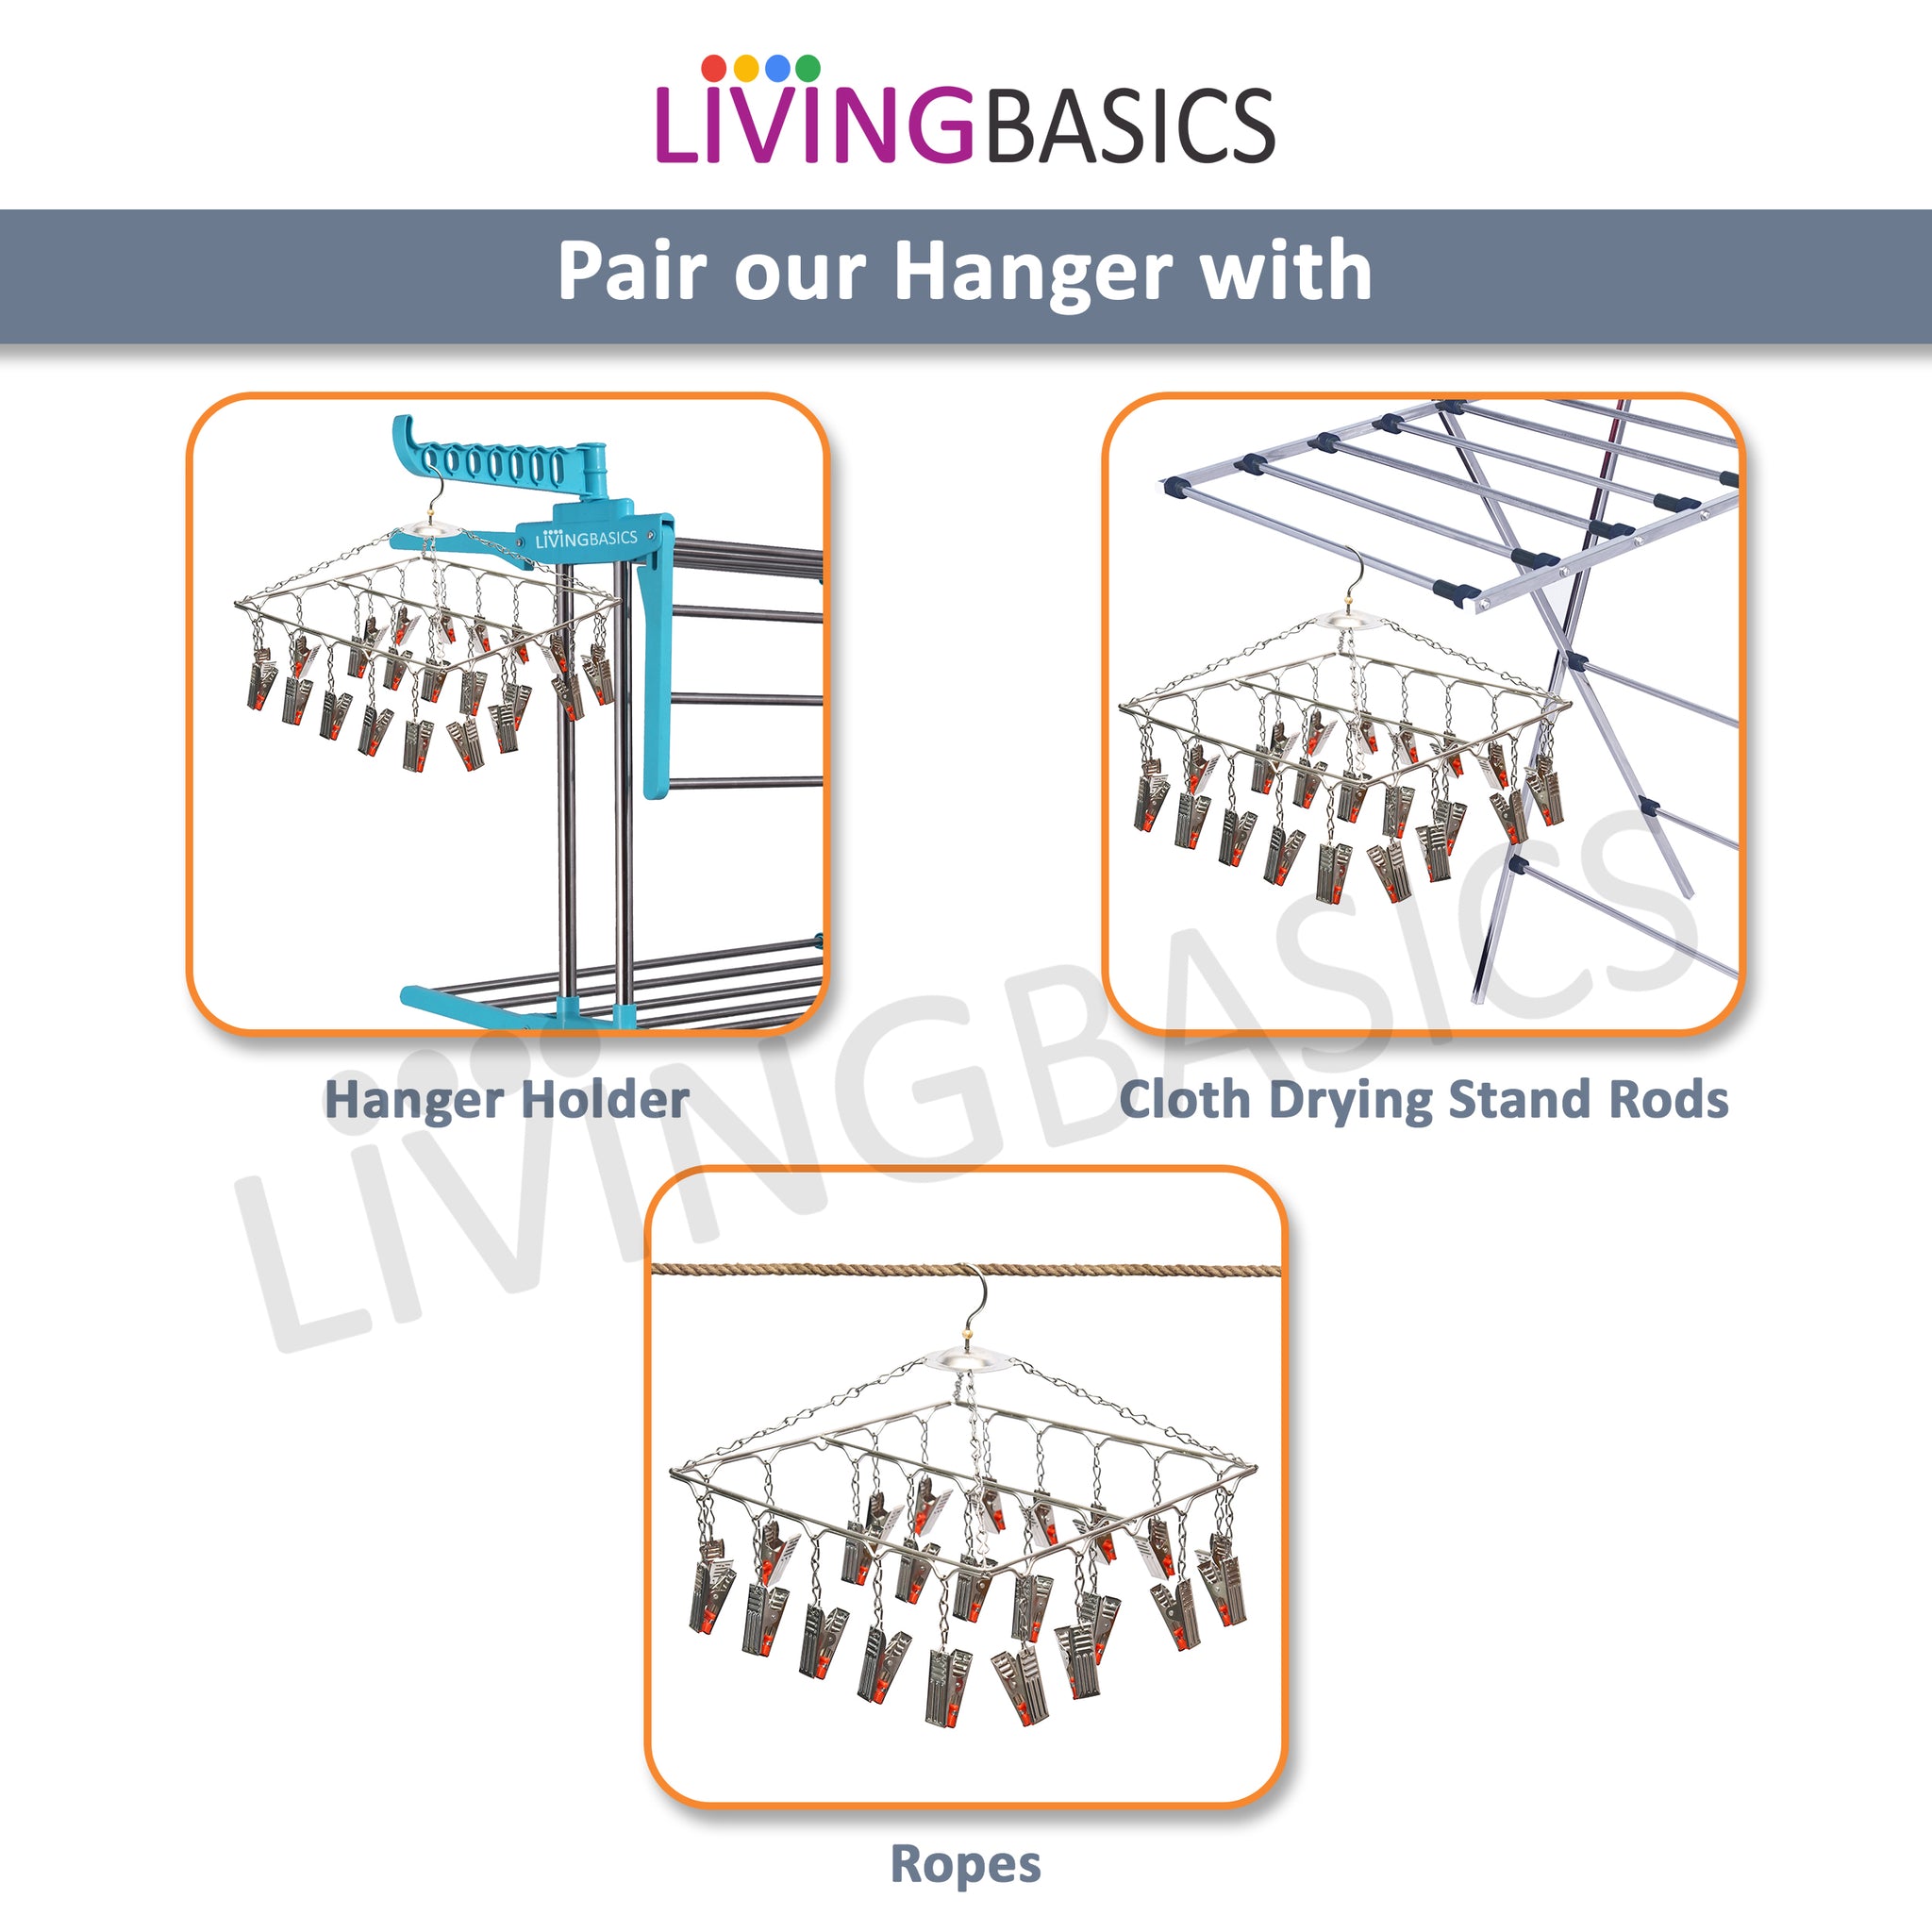 LivingBasics Stainless Steel Baby Cloth Clips Hanger with Drying Pins/Pegs for Rods/Ropes - Clothes Dryer Rack for Socks, Nappies, Hand Towel, Mask, Tie, Lingerie (25 Clip Hanger)